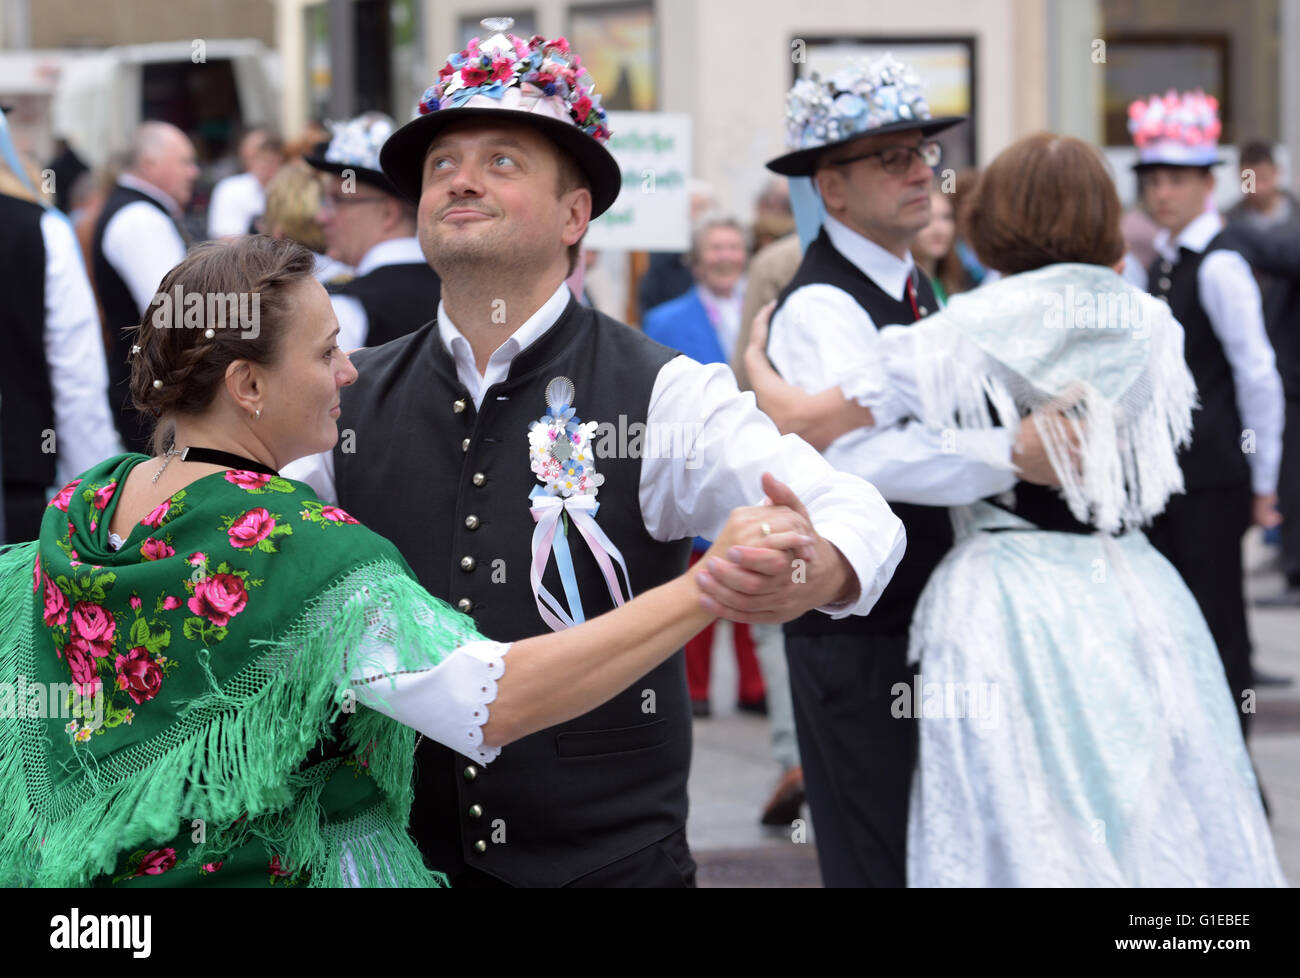 Ulm, Germany. 14th May, 2016. Banater Swabians dancing in their typical costumes in the inner city of Ulm, Germany, 14 May 2016. The ethnic group presents its customs and traditions before the celebrations on White Sunday. PHOTO: STEFAN PUCHNER/dpa/Alamy Live News Stock Photo